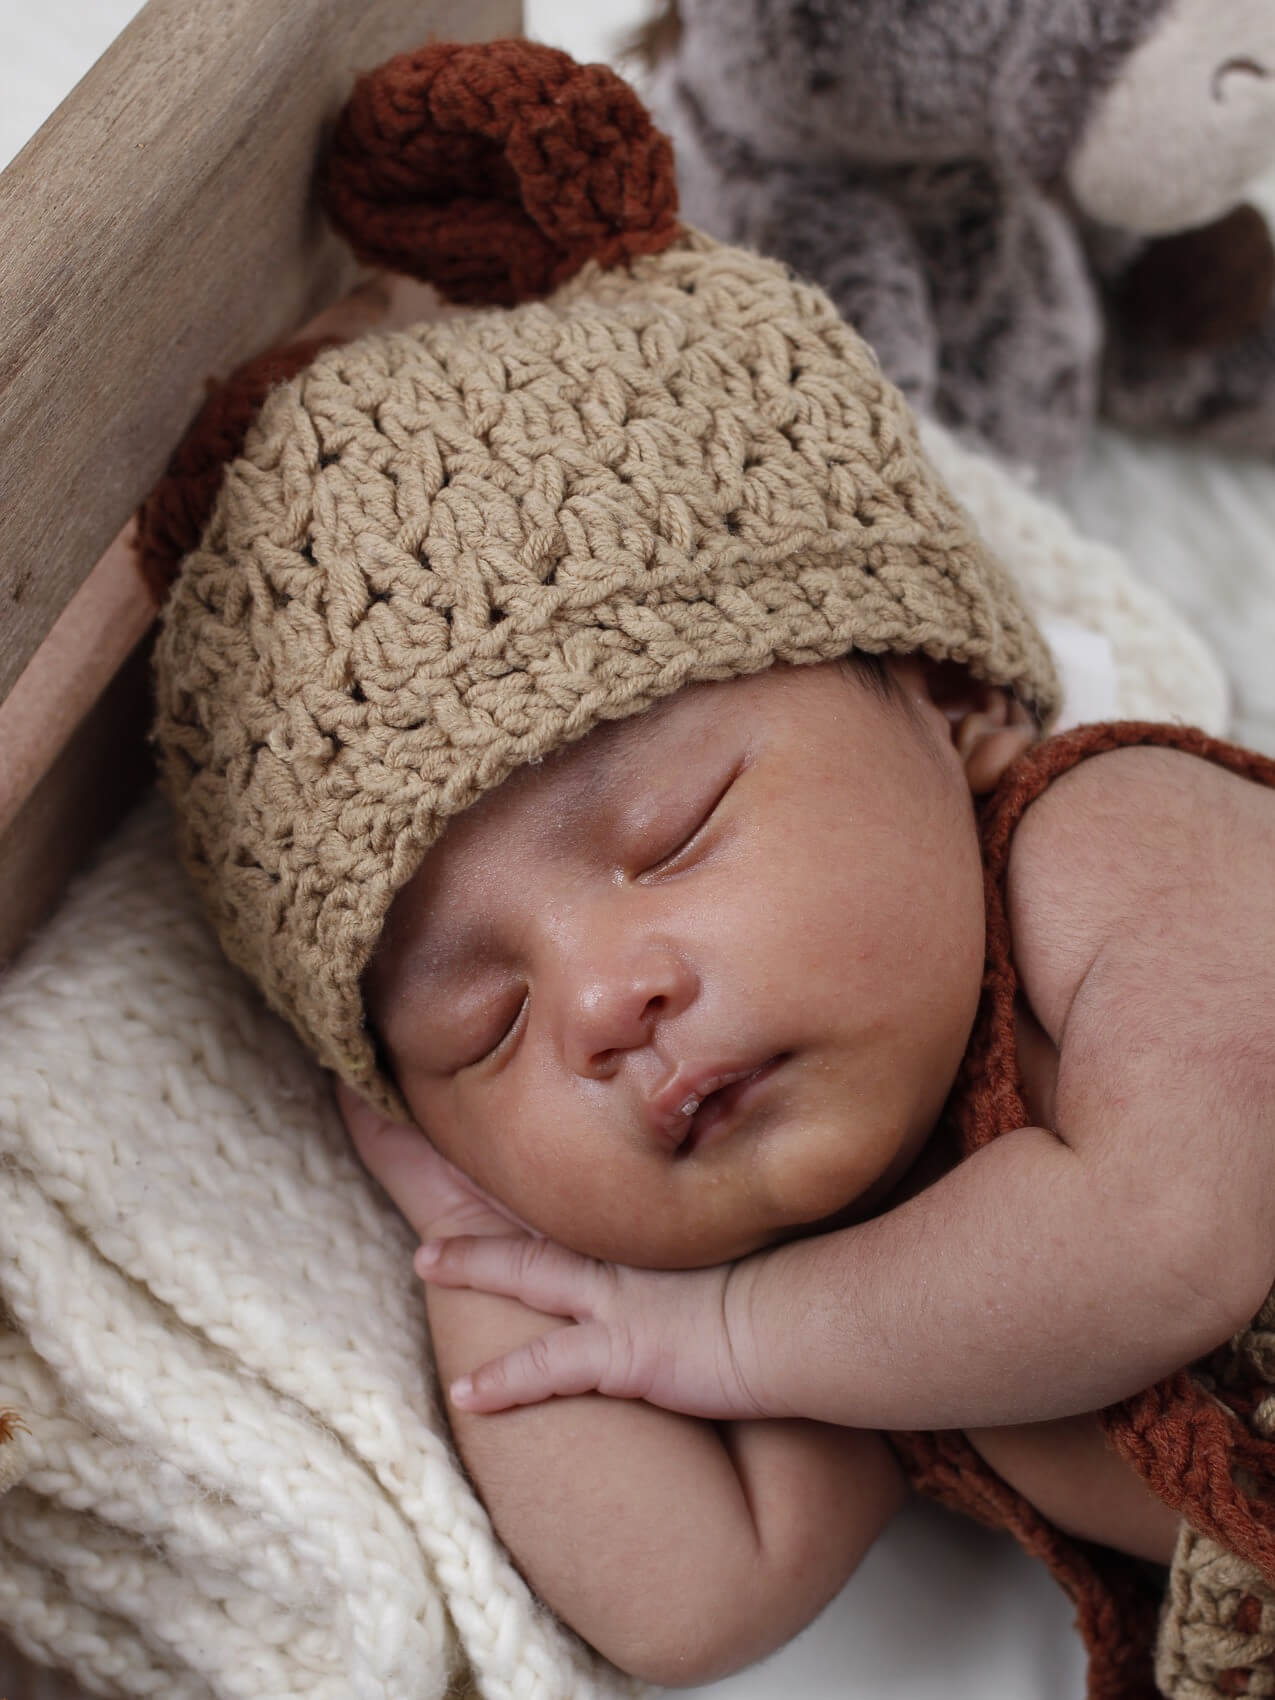 A baby is sleeping with a beanie